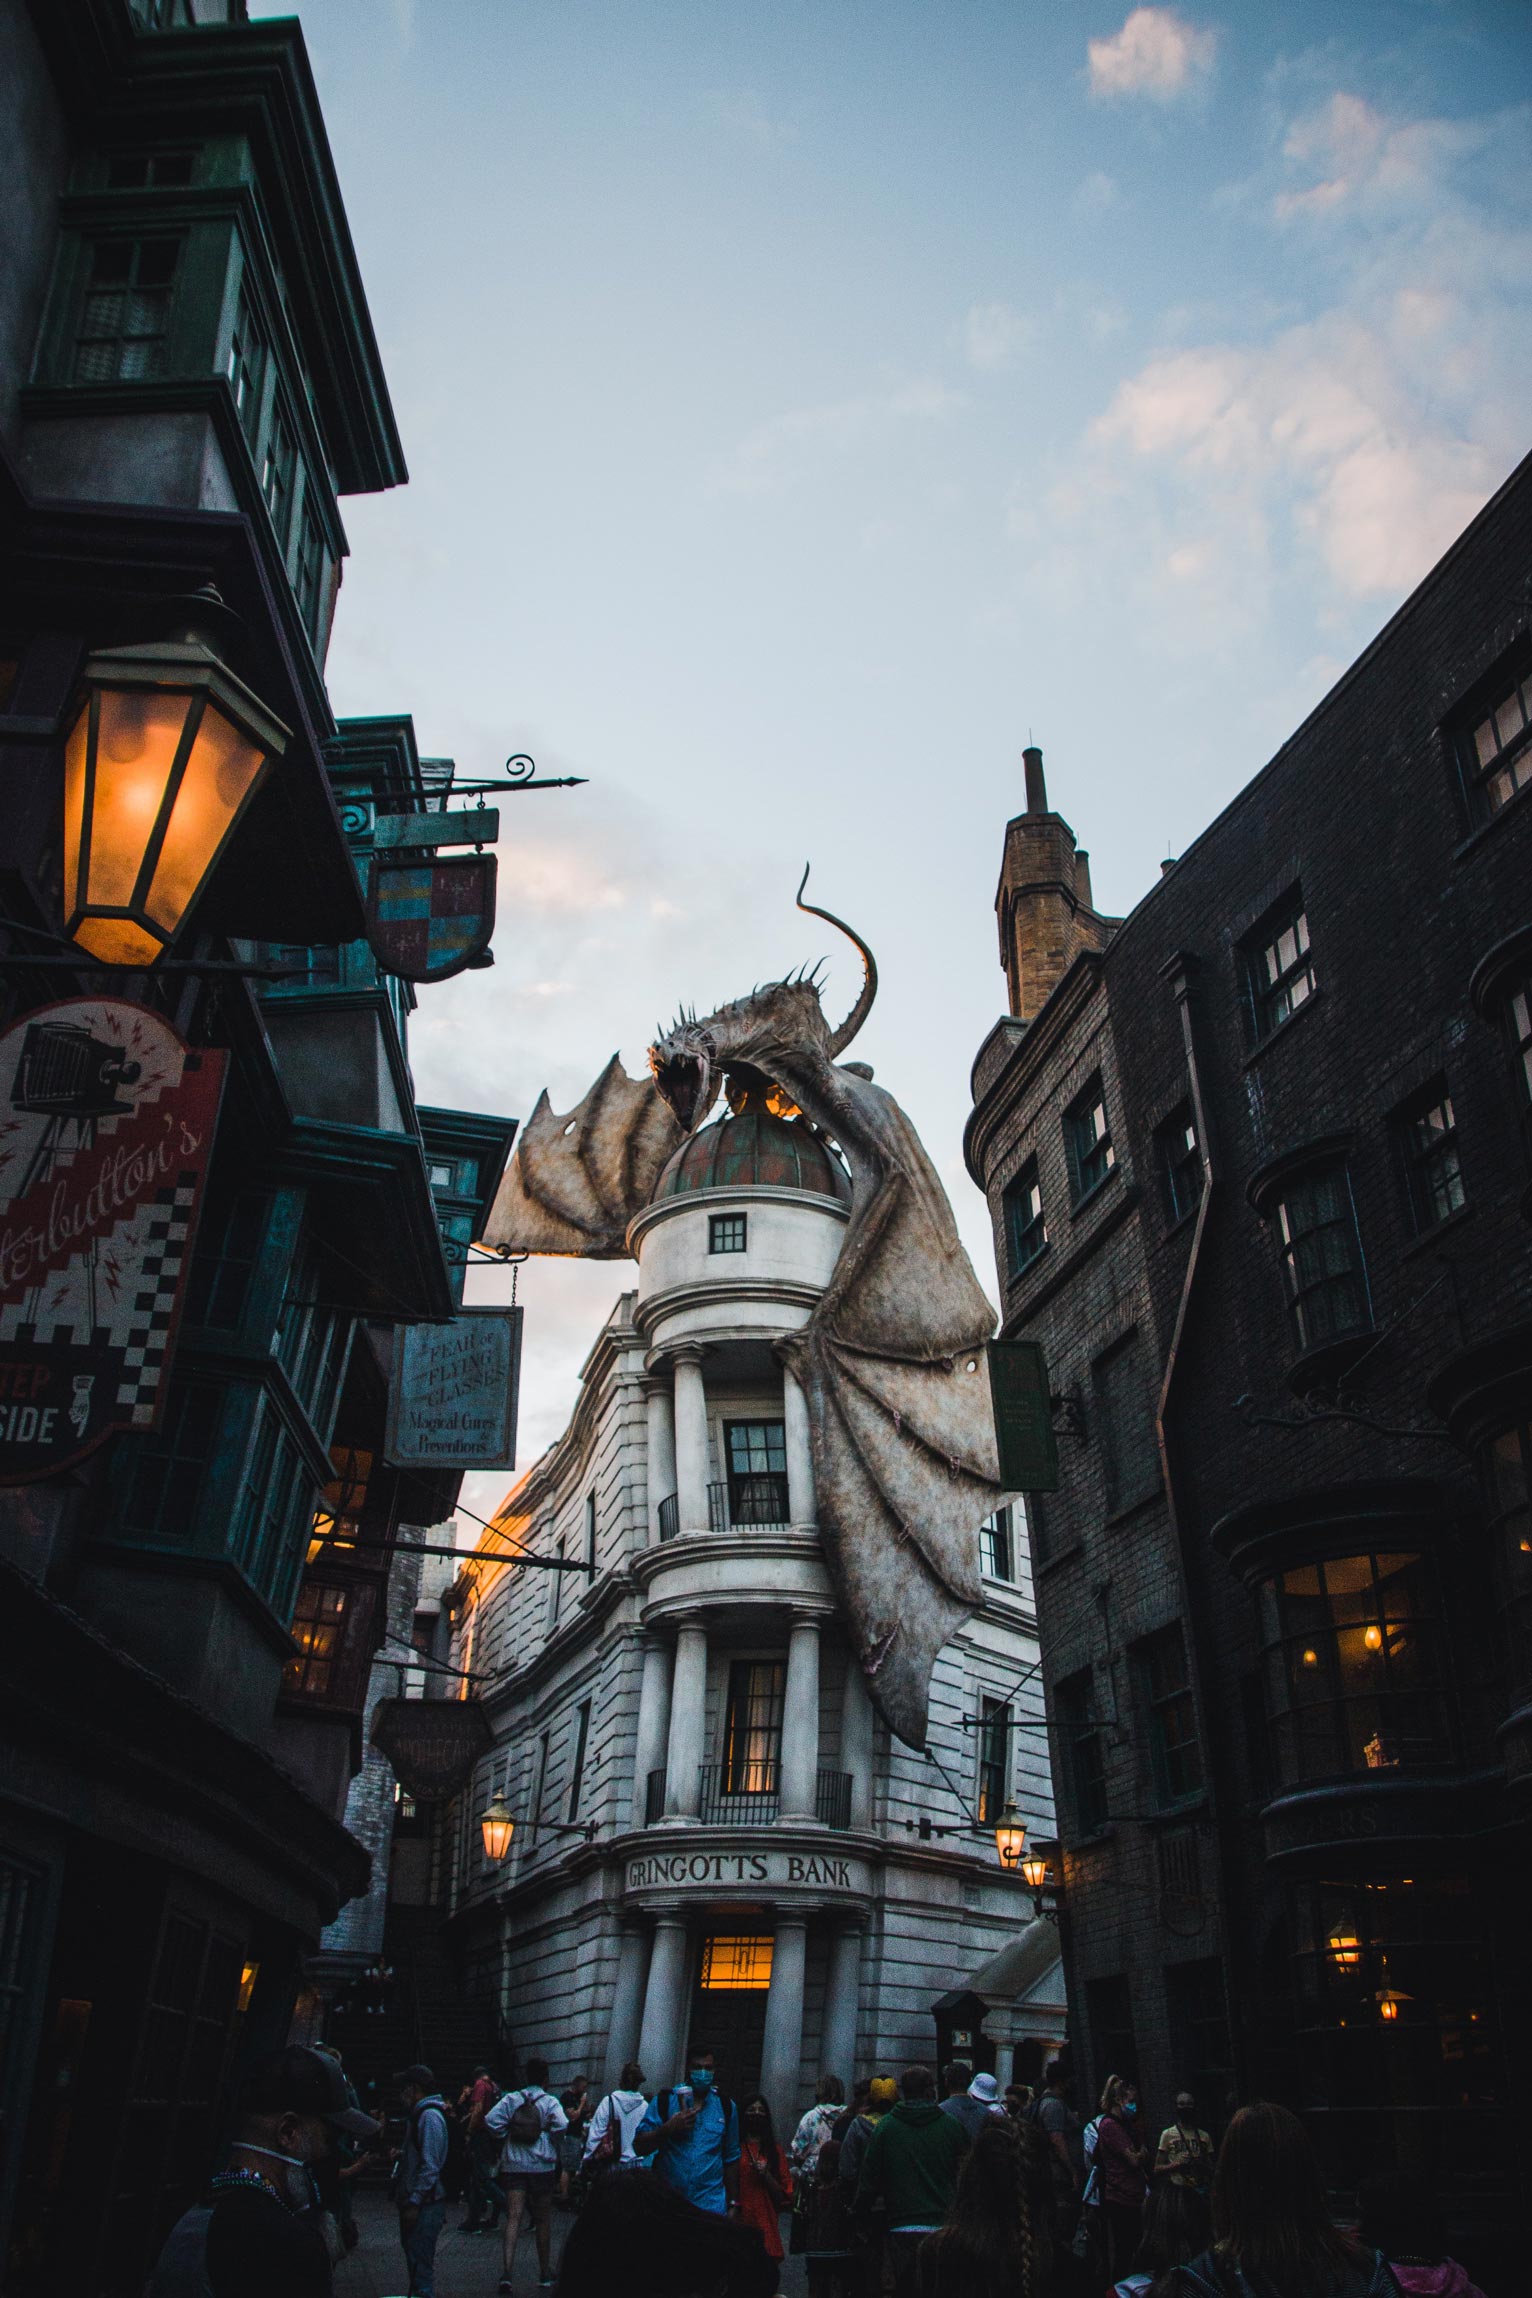 About the mood image: This is not your average bank in real life. Gringotts is the only known bank of the Harry Potter wizarding world and it is operated primarily by goblins. Wizards and witches keep their money and other valuables in vaults that are protected by very complex and strong security measures. Photo: unsplash / Dan Cutler